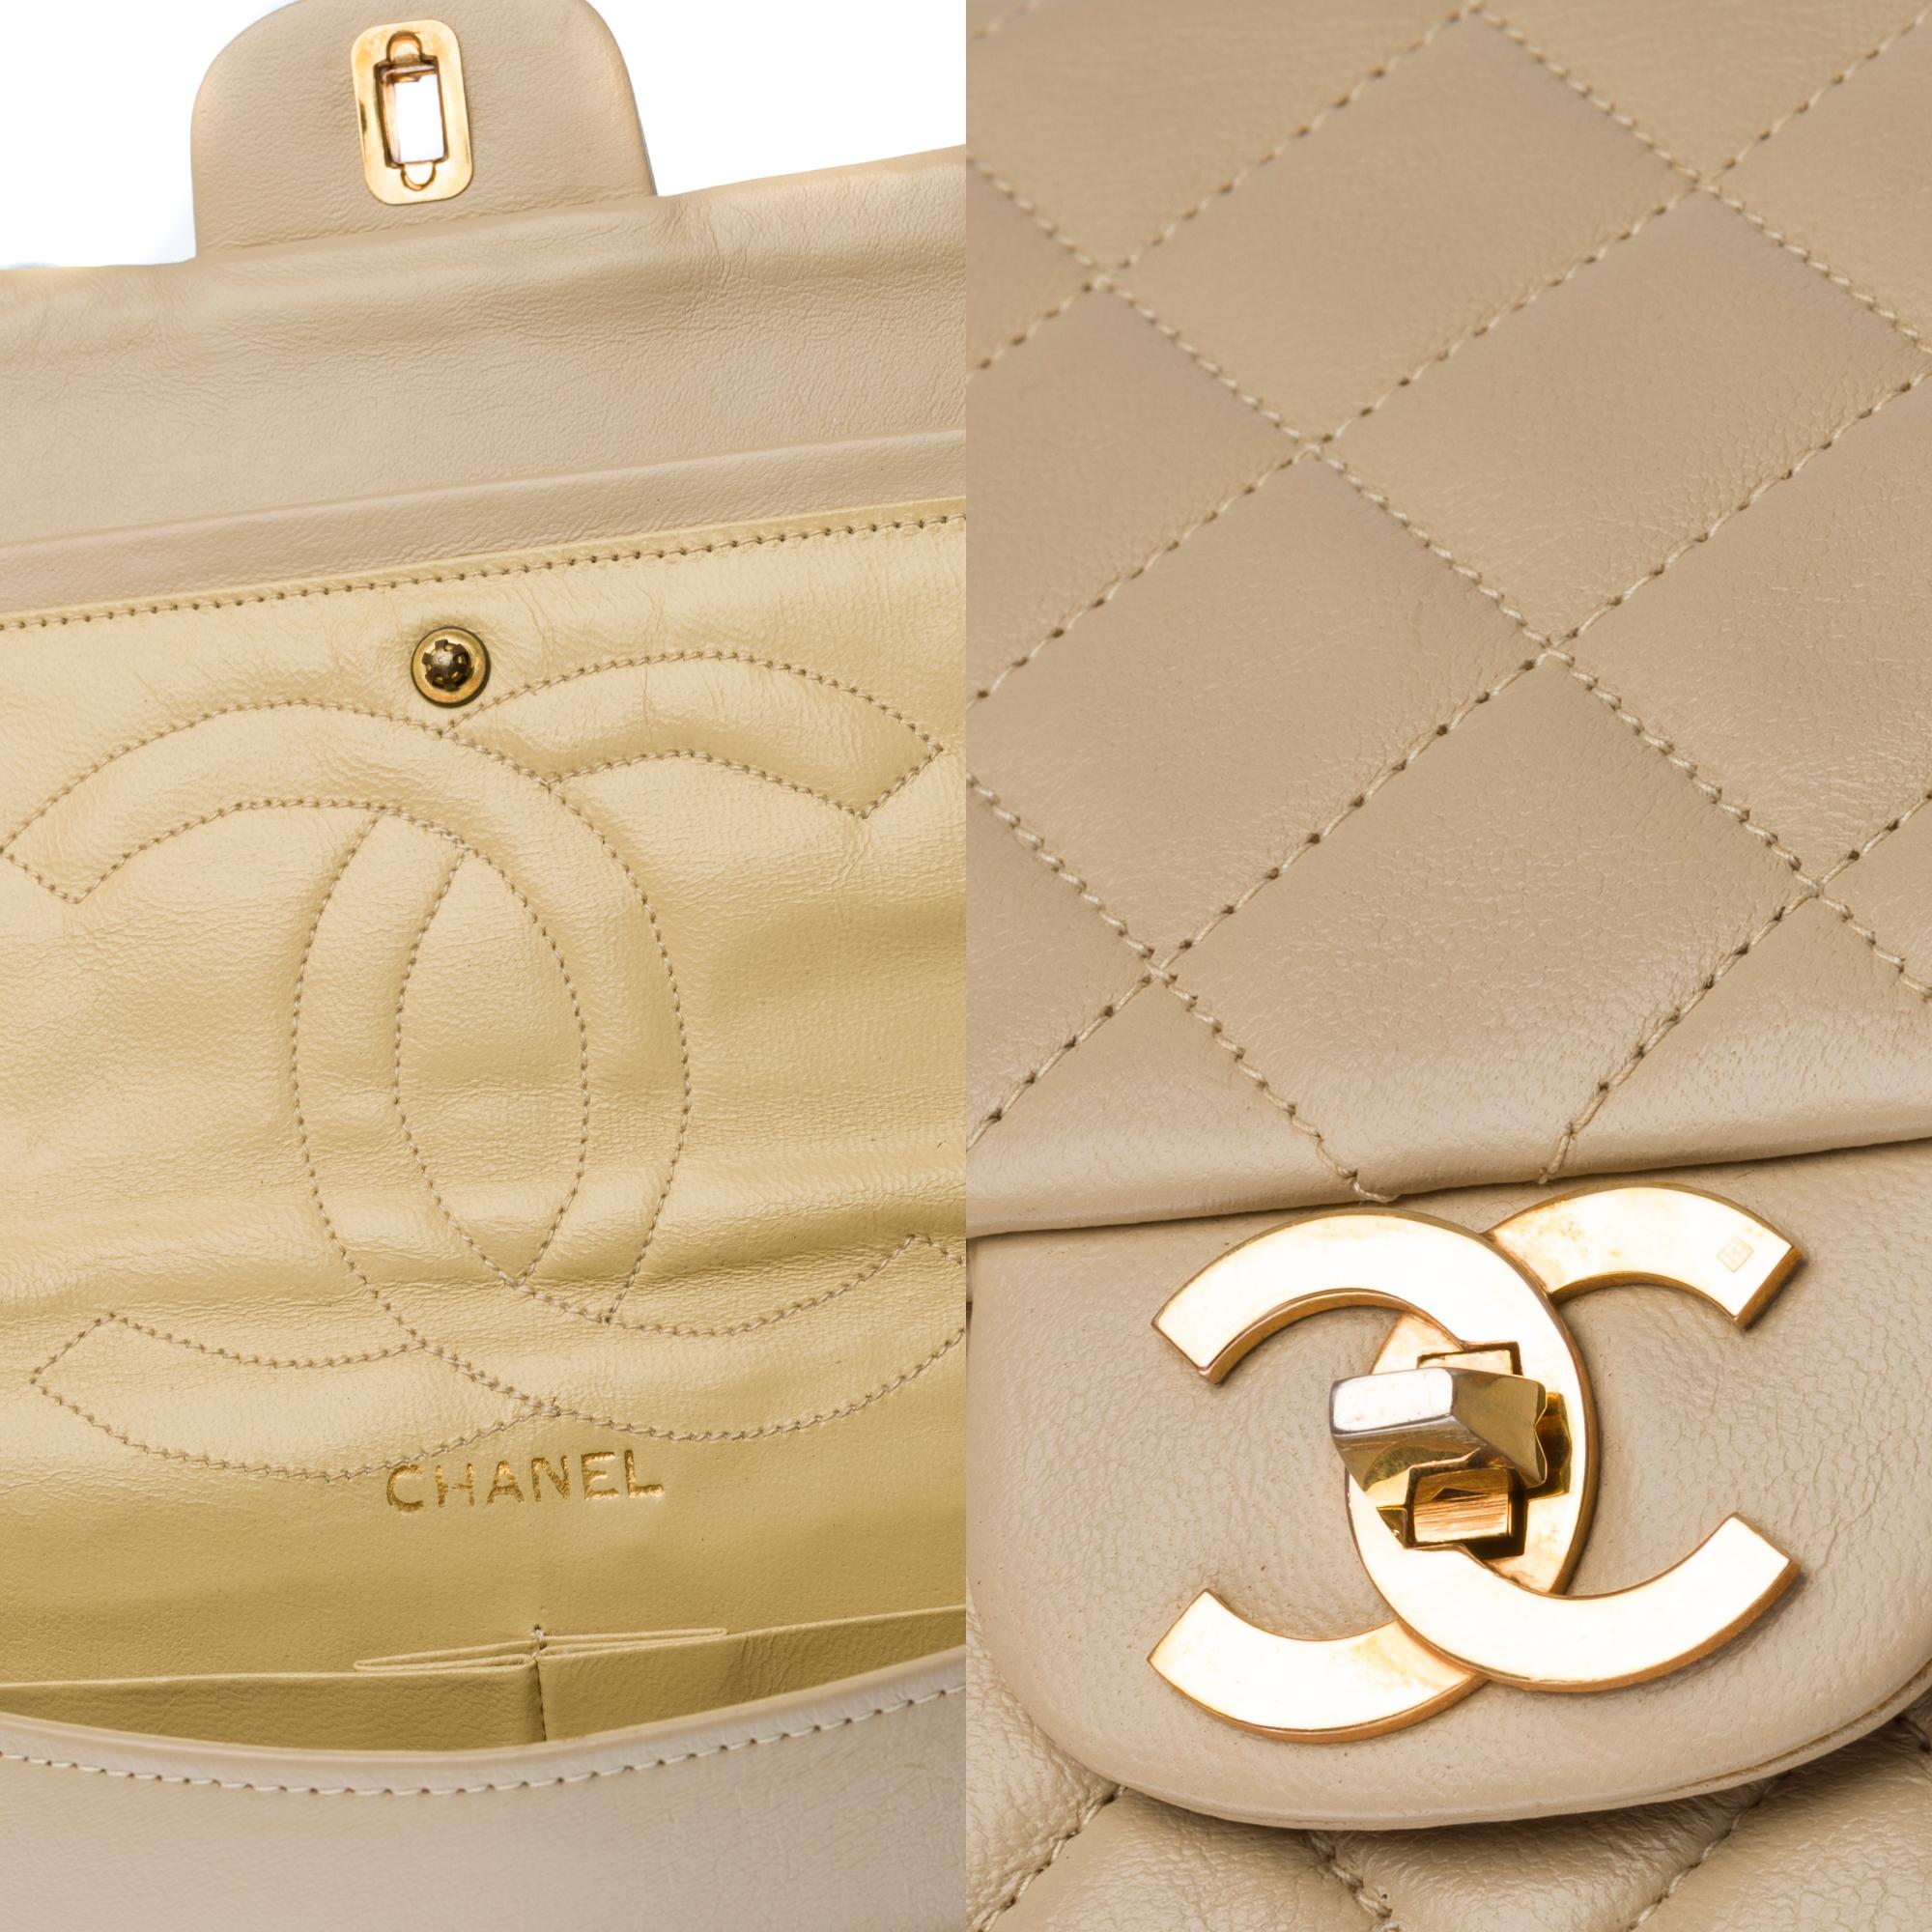 Women's Chanel Timeless Medium double flap Shoulder bag in beige quilted leather, GHW